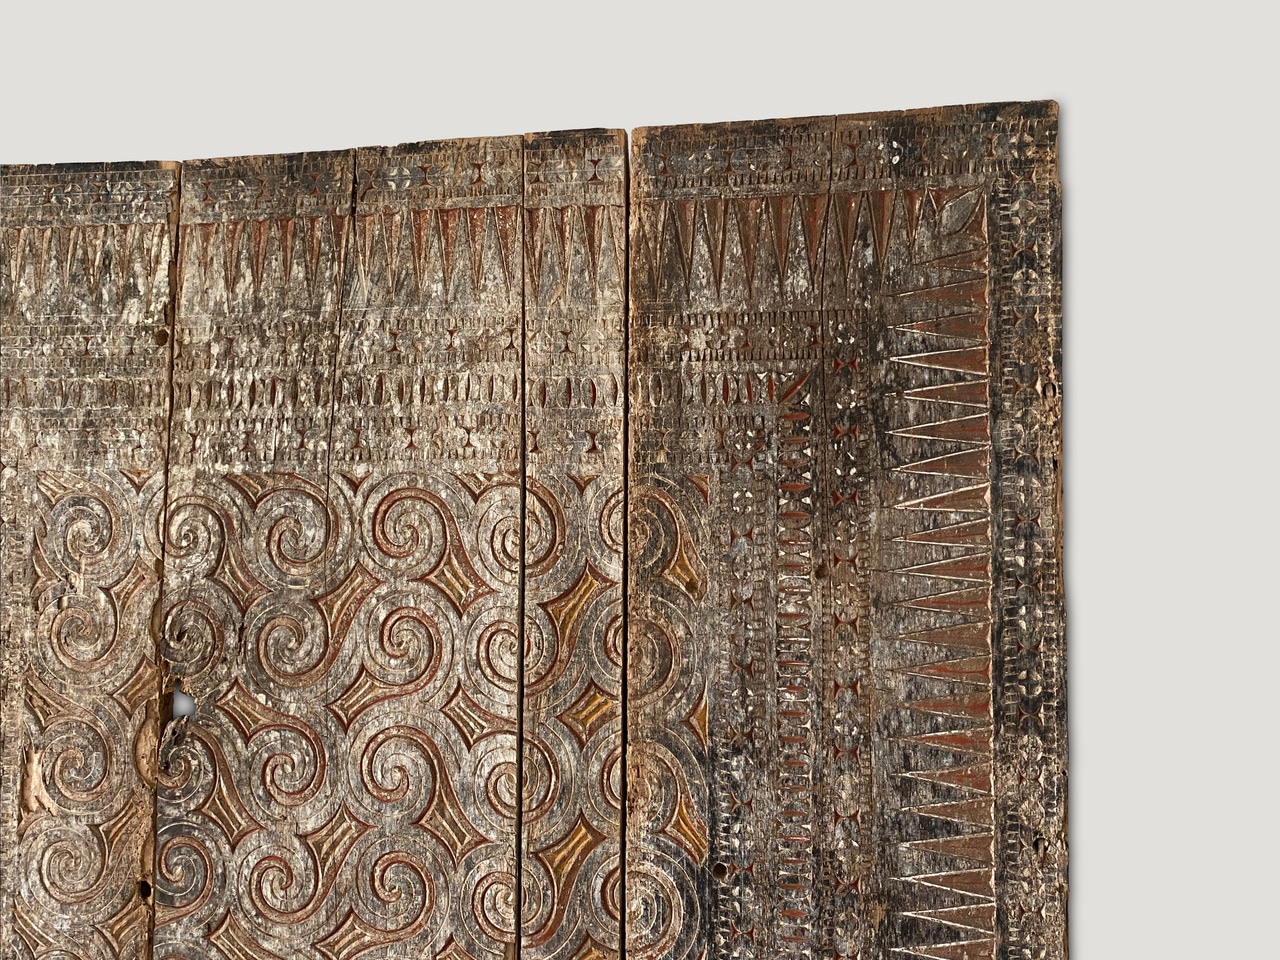 hand-carved ancient panel from Toraja,